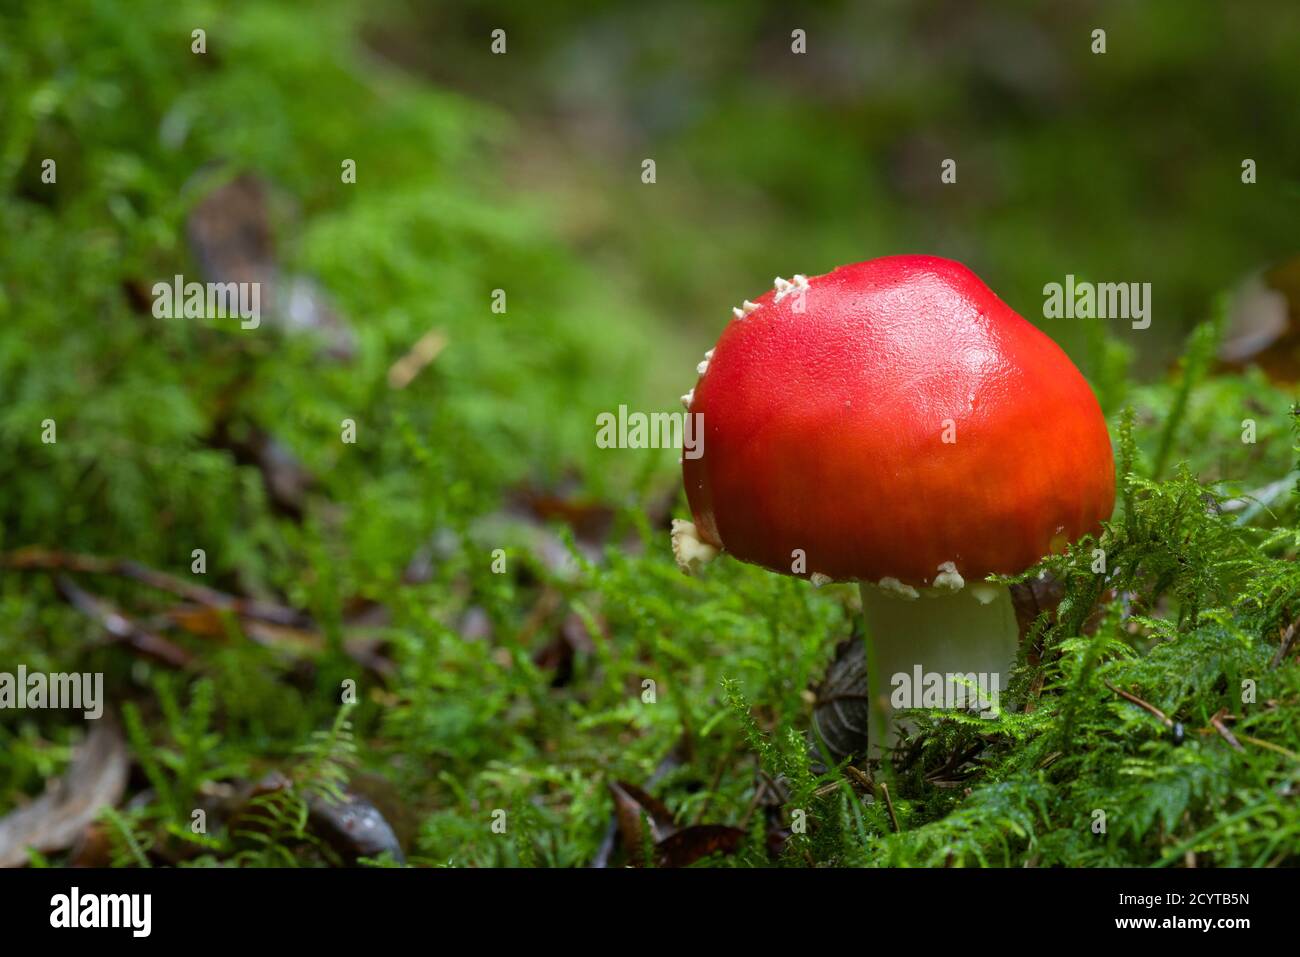 Fly Agaric or Fly Amanita (Amanita muscaria) mushroom growing on a woodland floor in the Mendip Hills, Somerset, England. Stock Photo